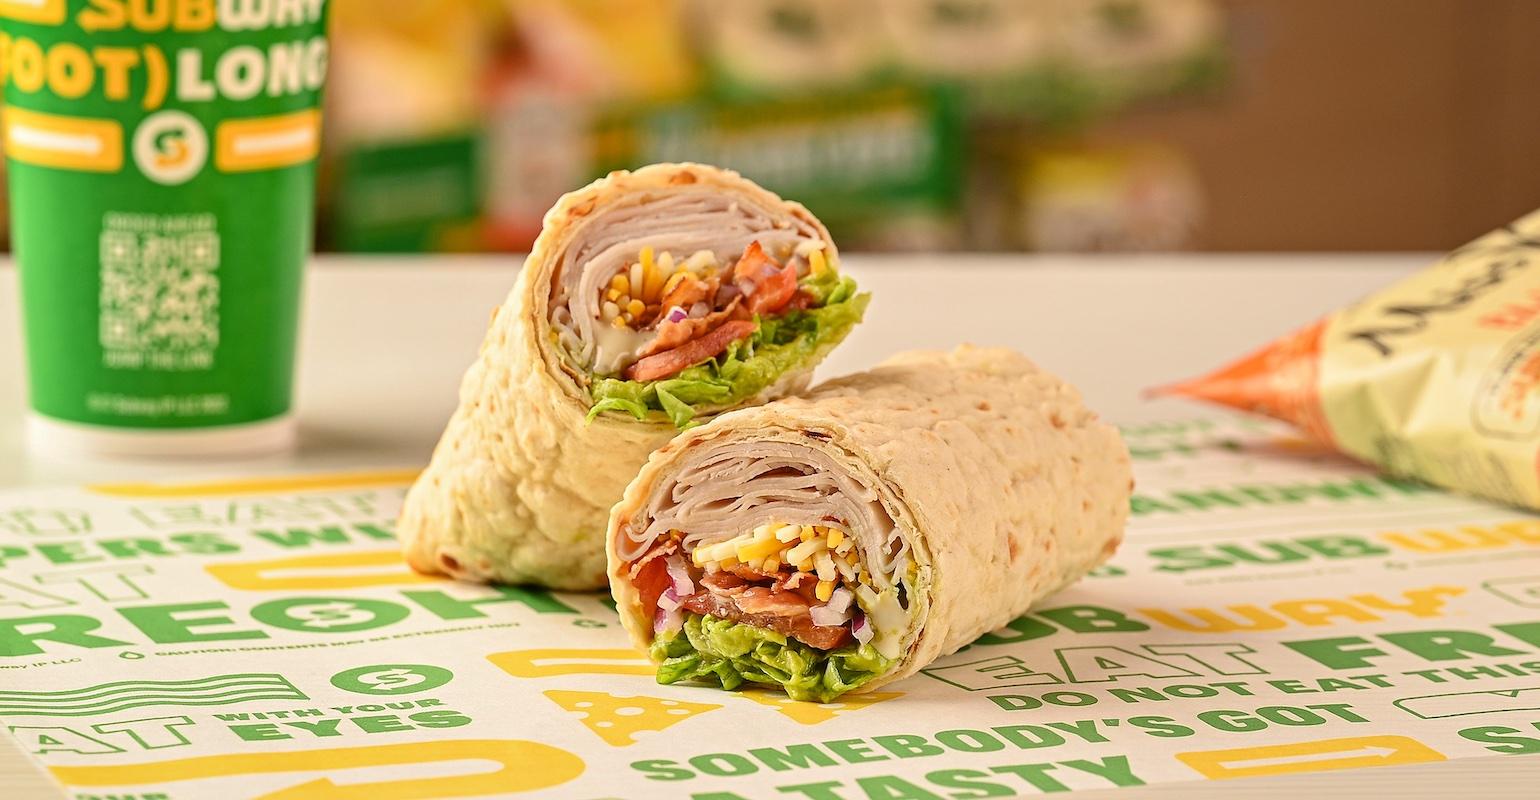 Subway’s New Wraps Elevate Eating on the Go